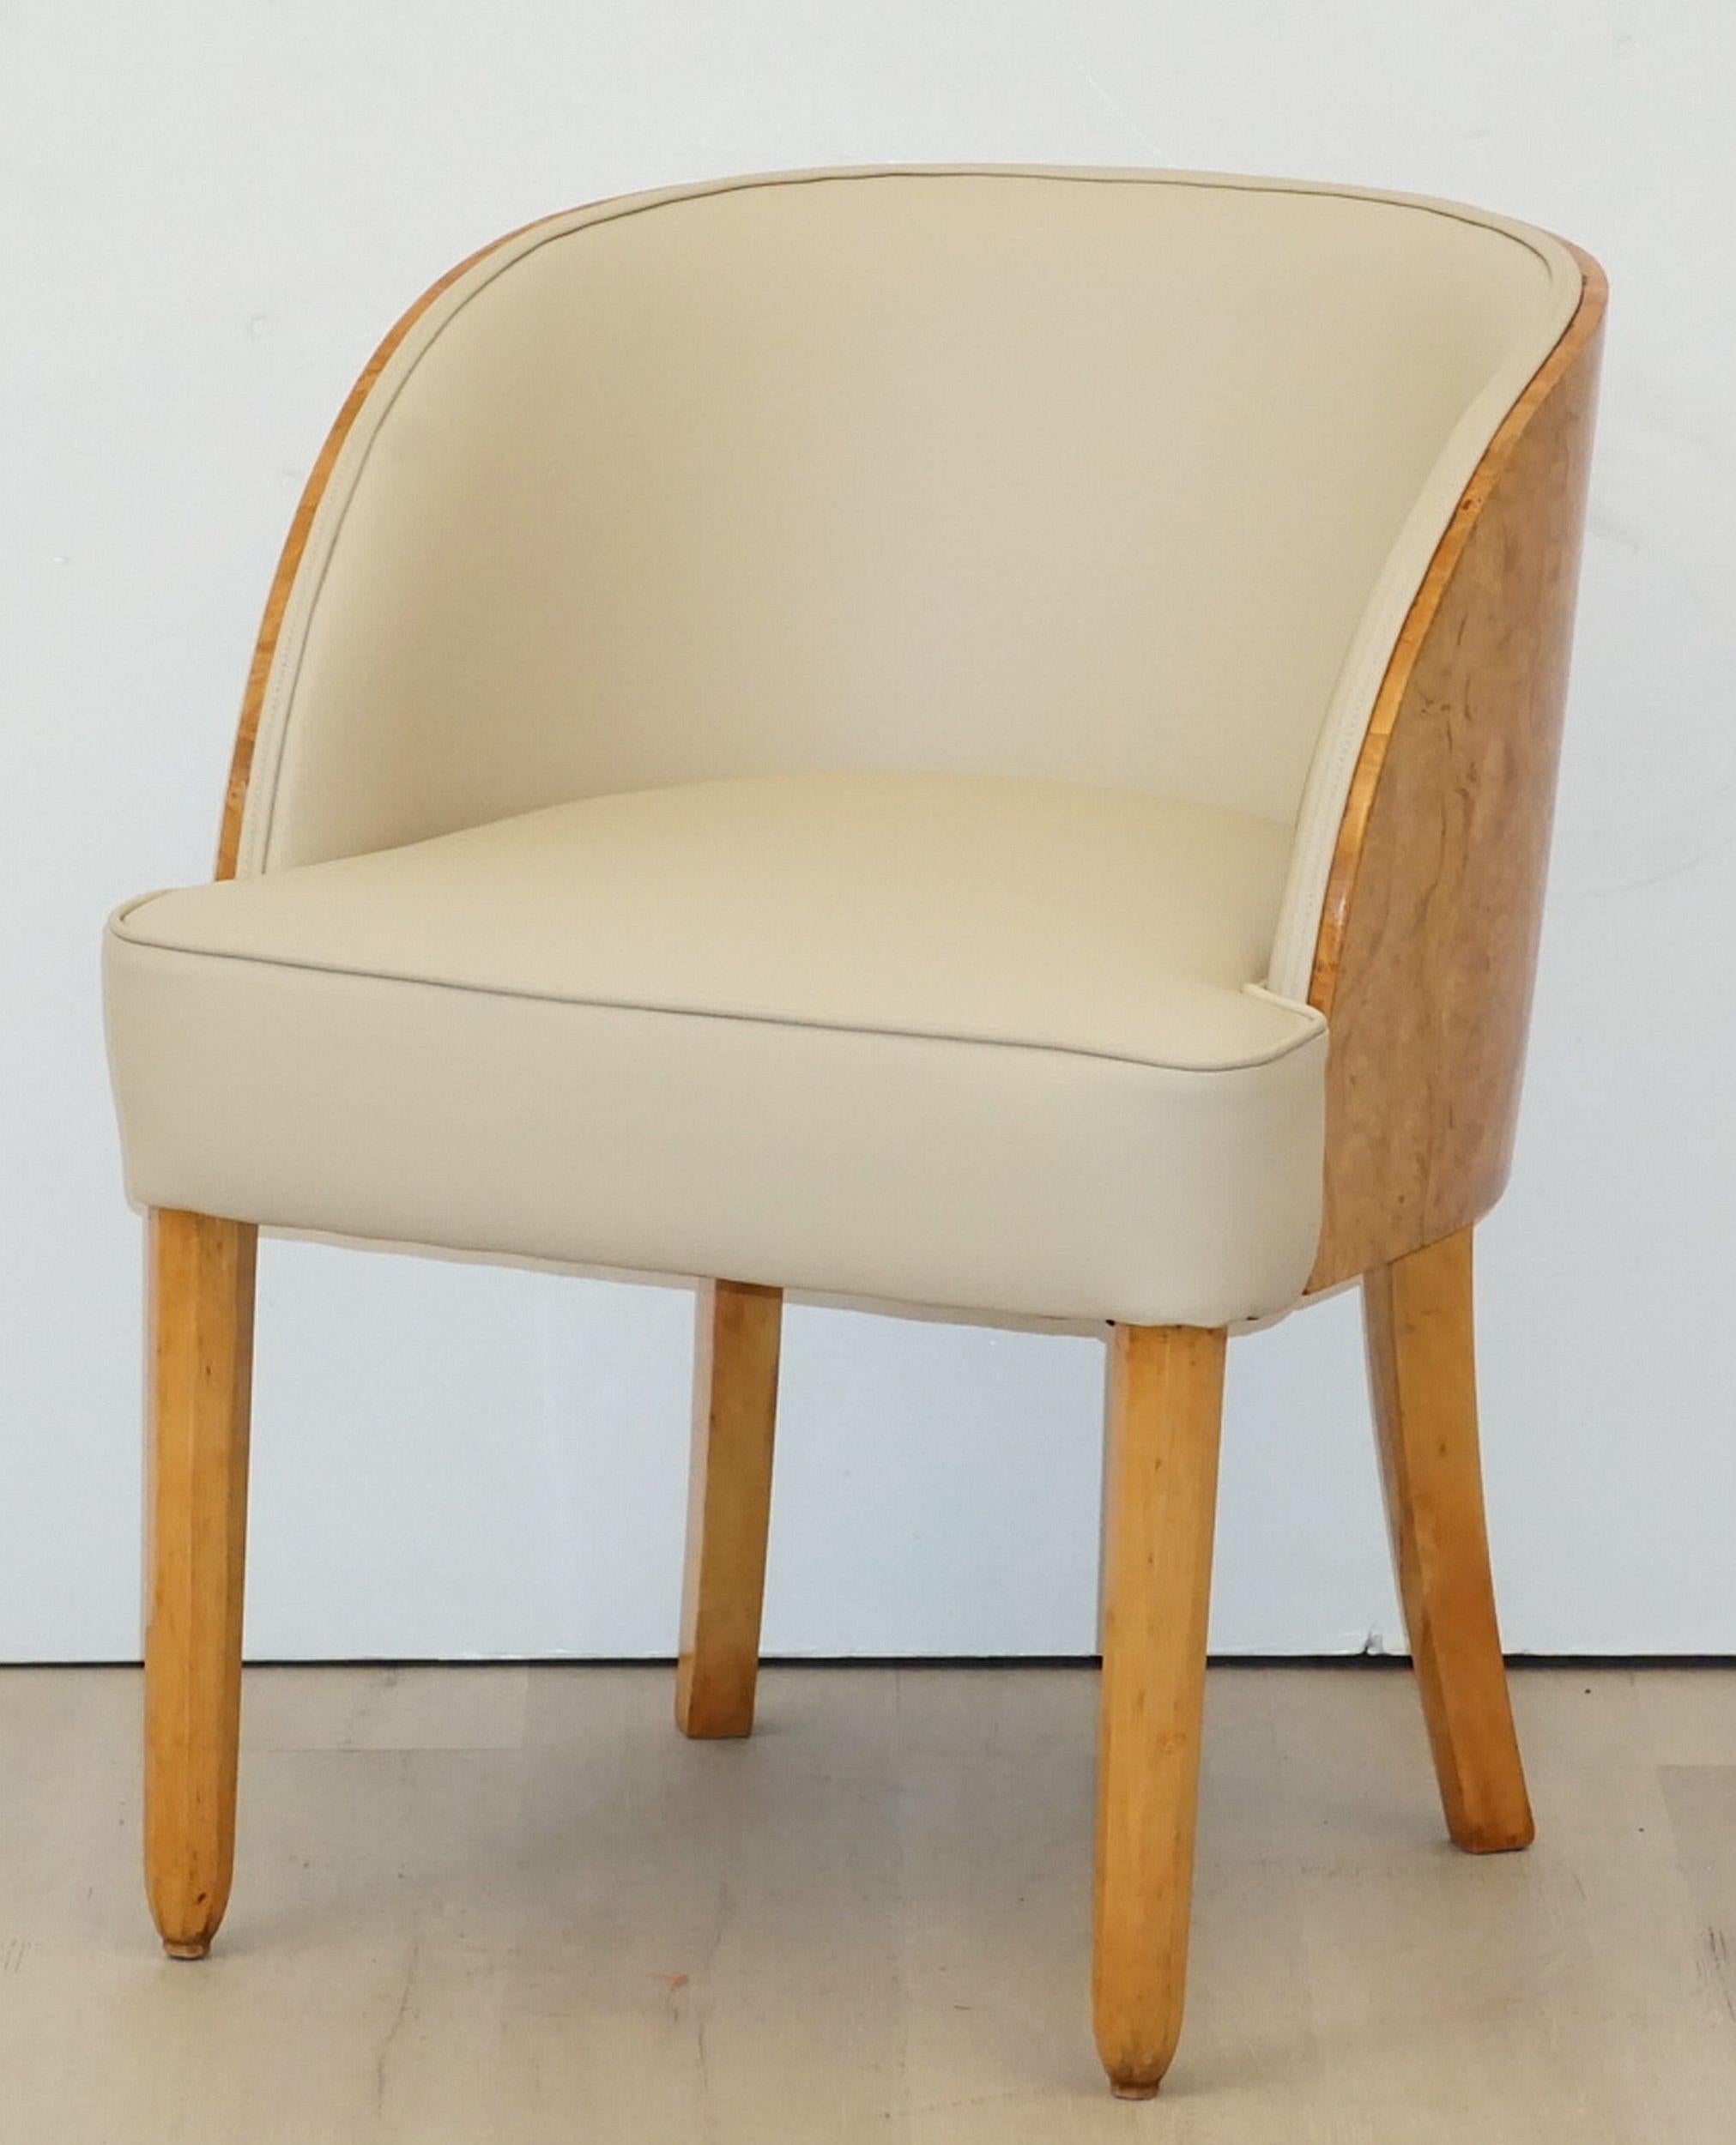 English Art Deco Walnut Chair Attributed to Harry and Lou Epstein